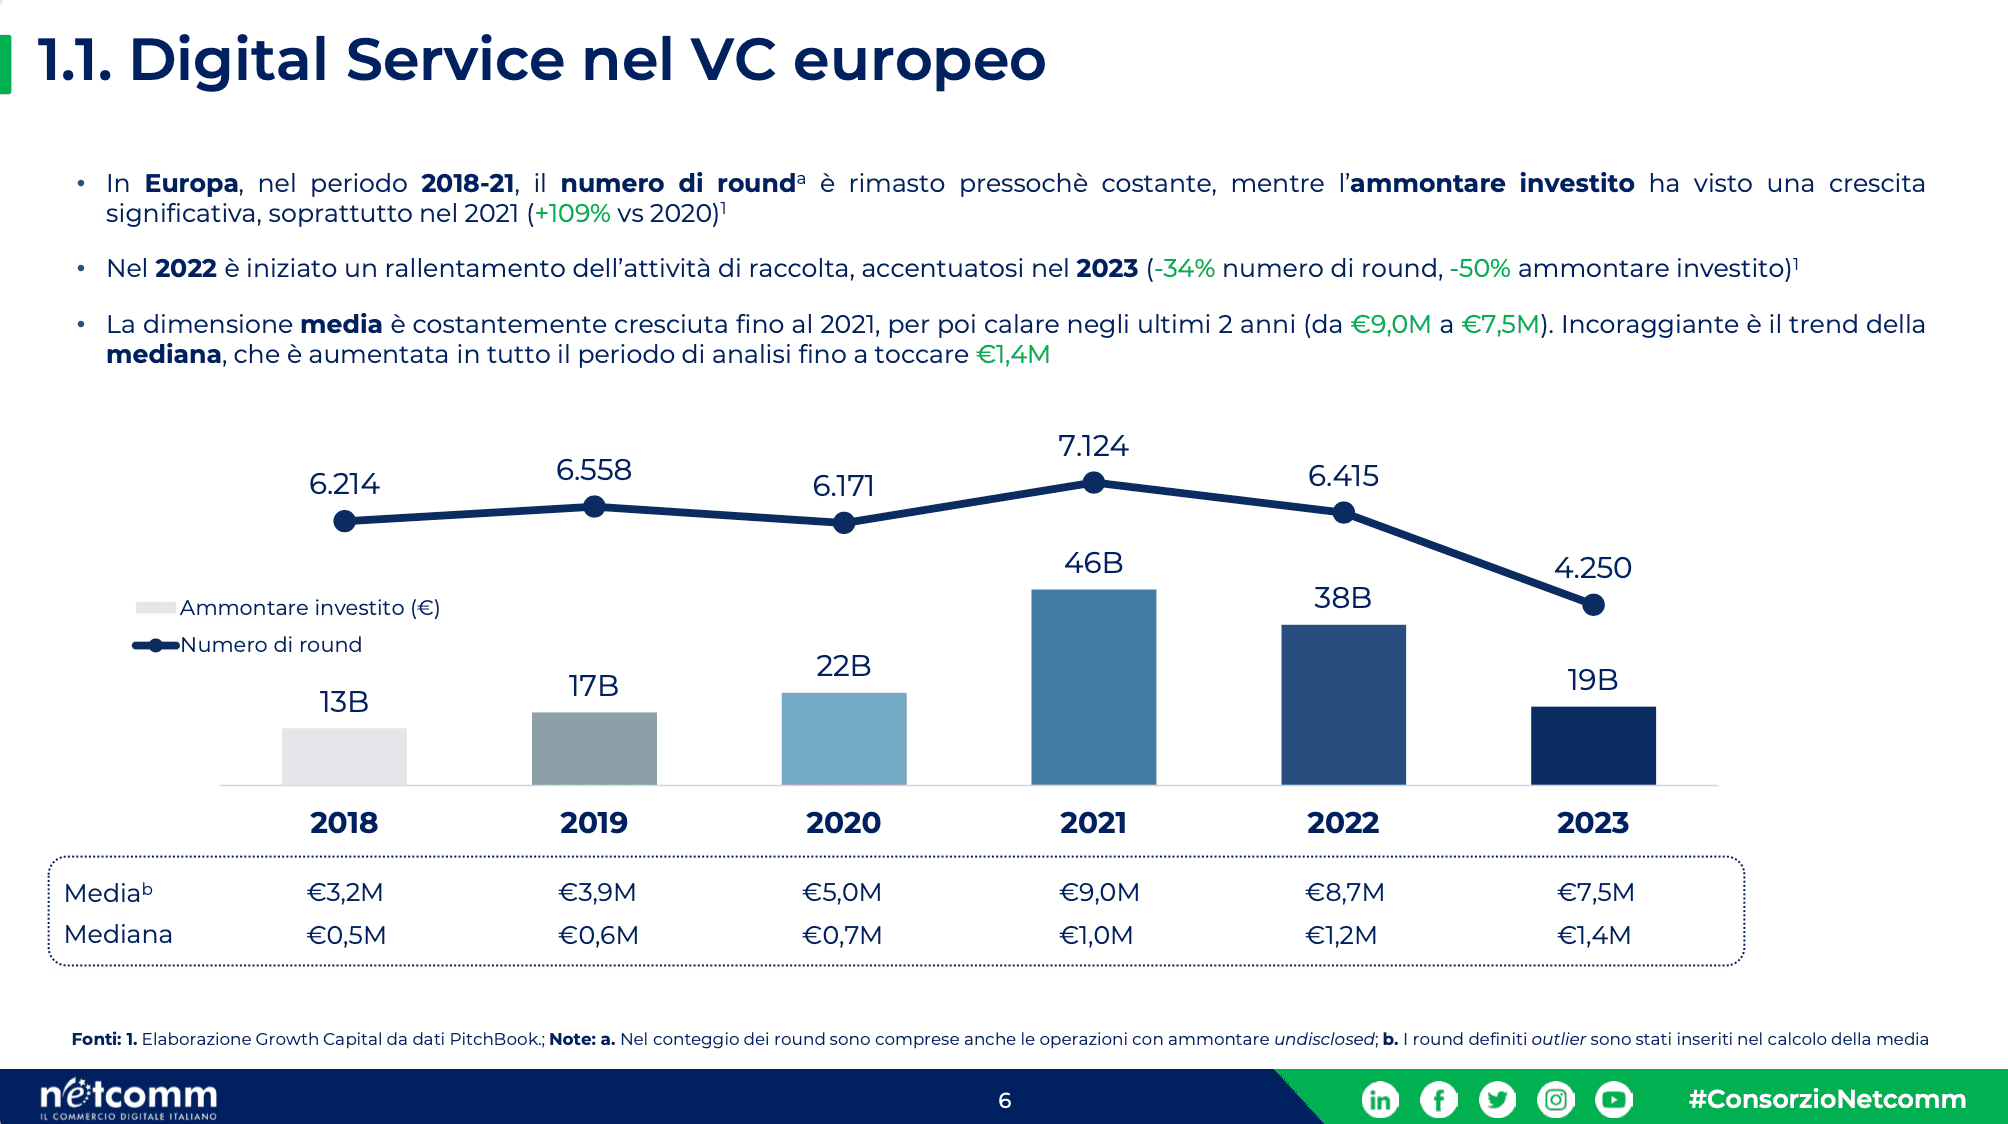 Digital services nel VC Europeo